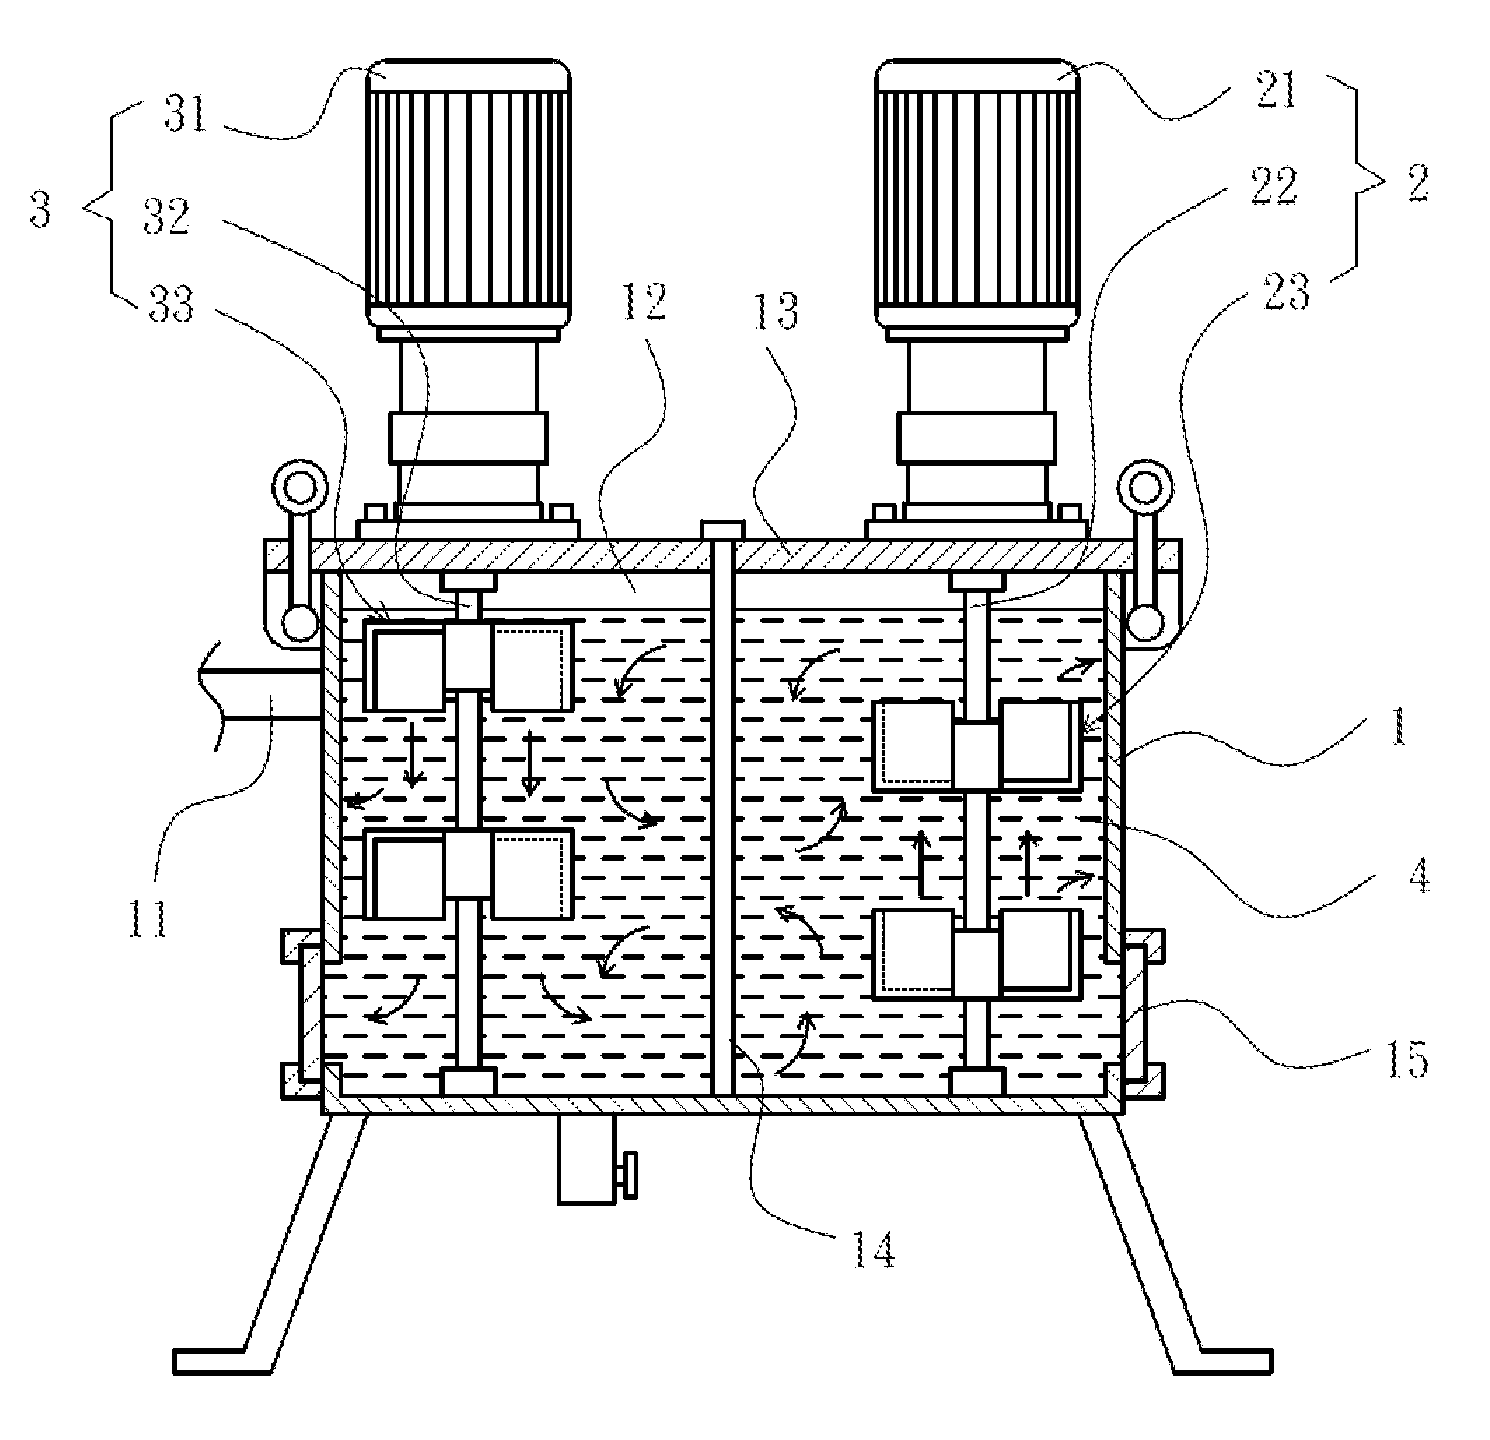 Device for processing molecular clusters of liquid to nano-scale